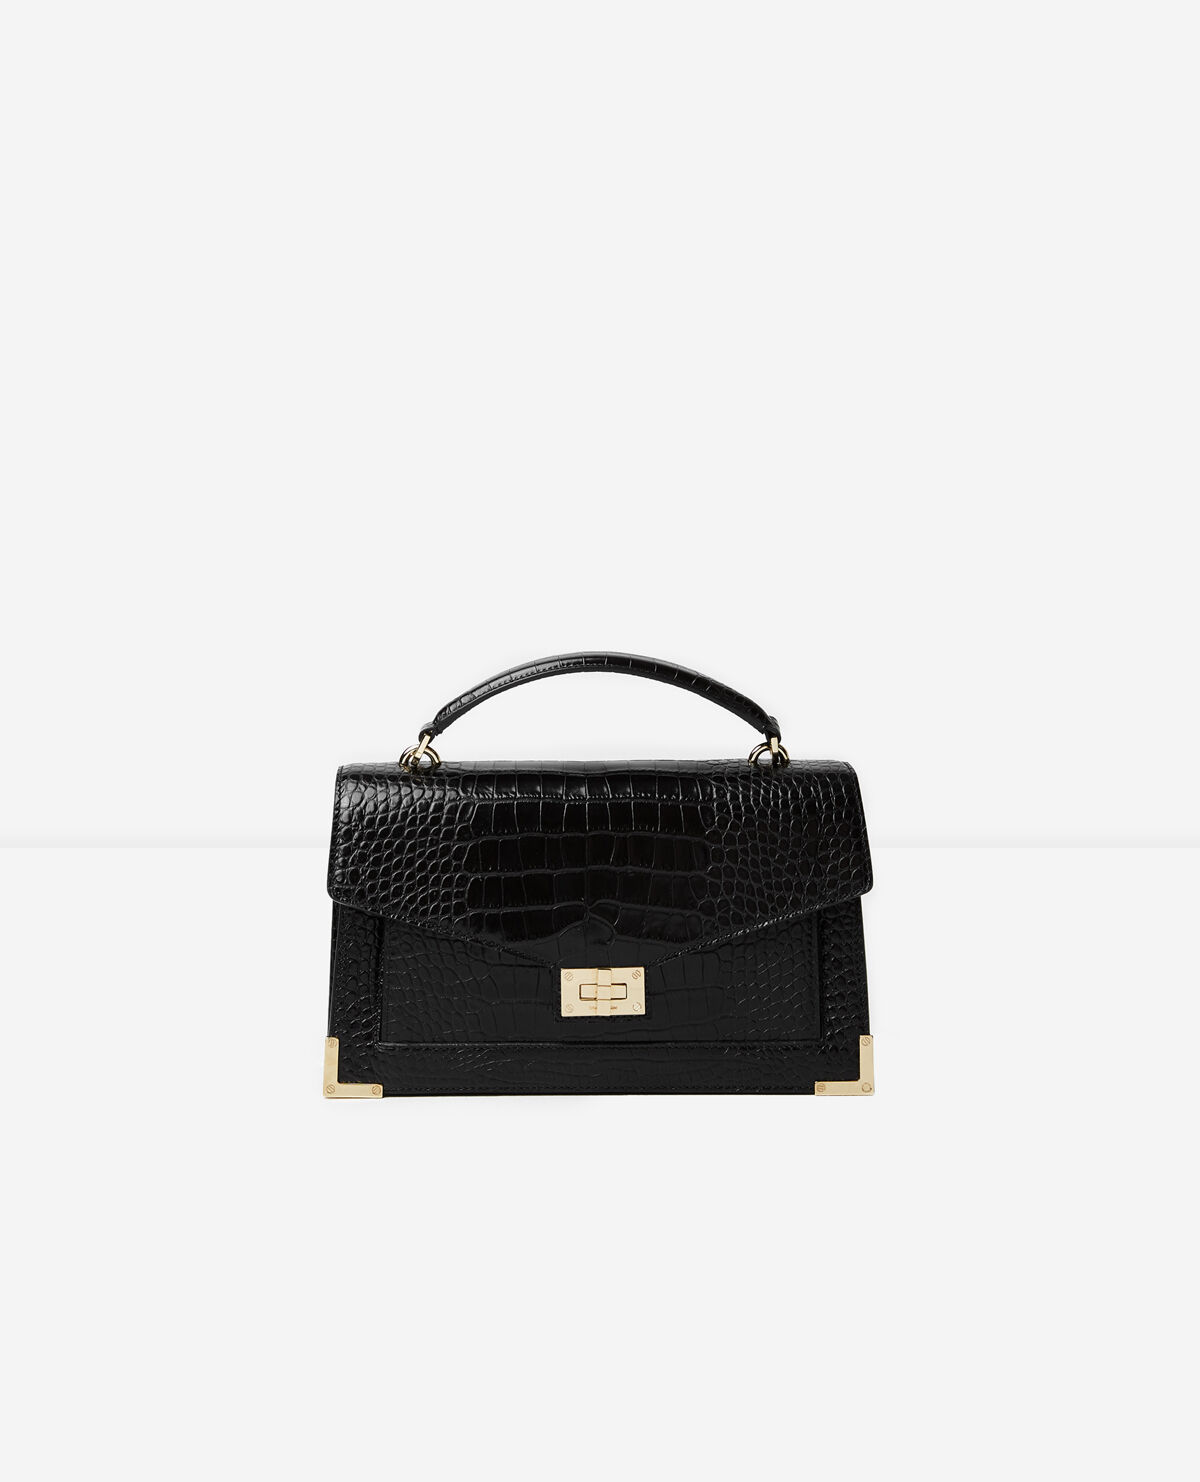 Small Emily bag in black lizard effect leather | The Kooples